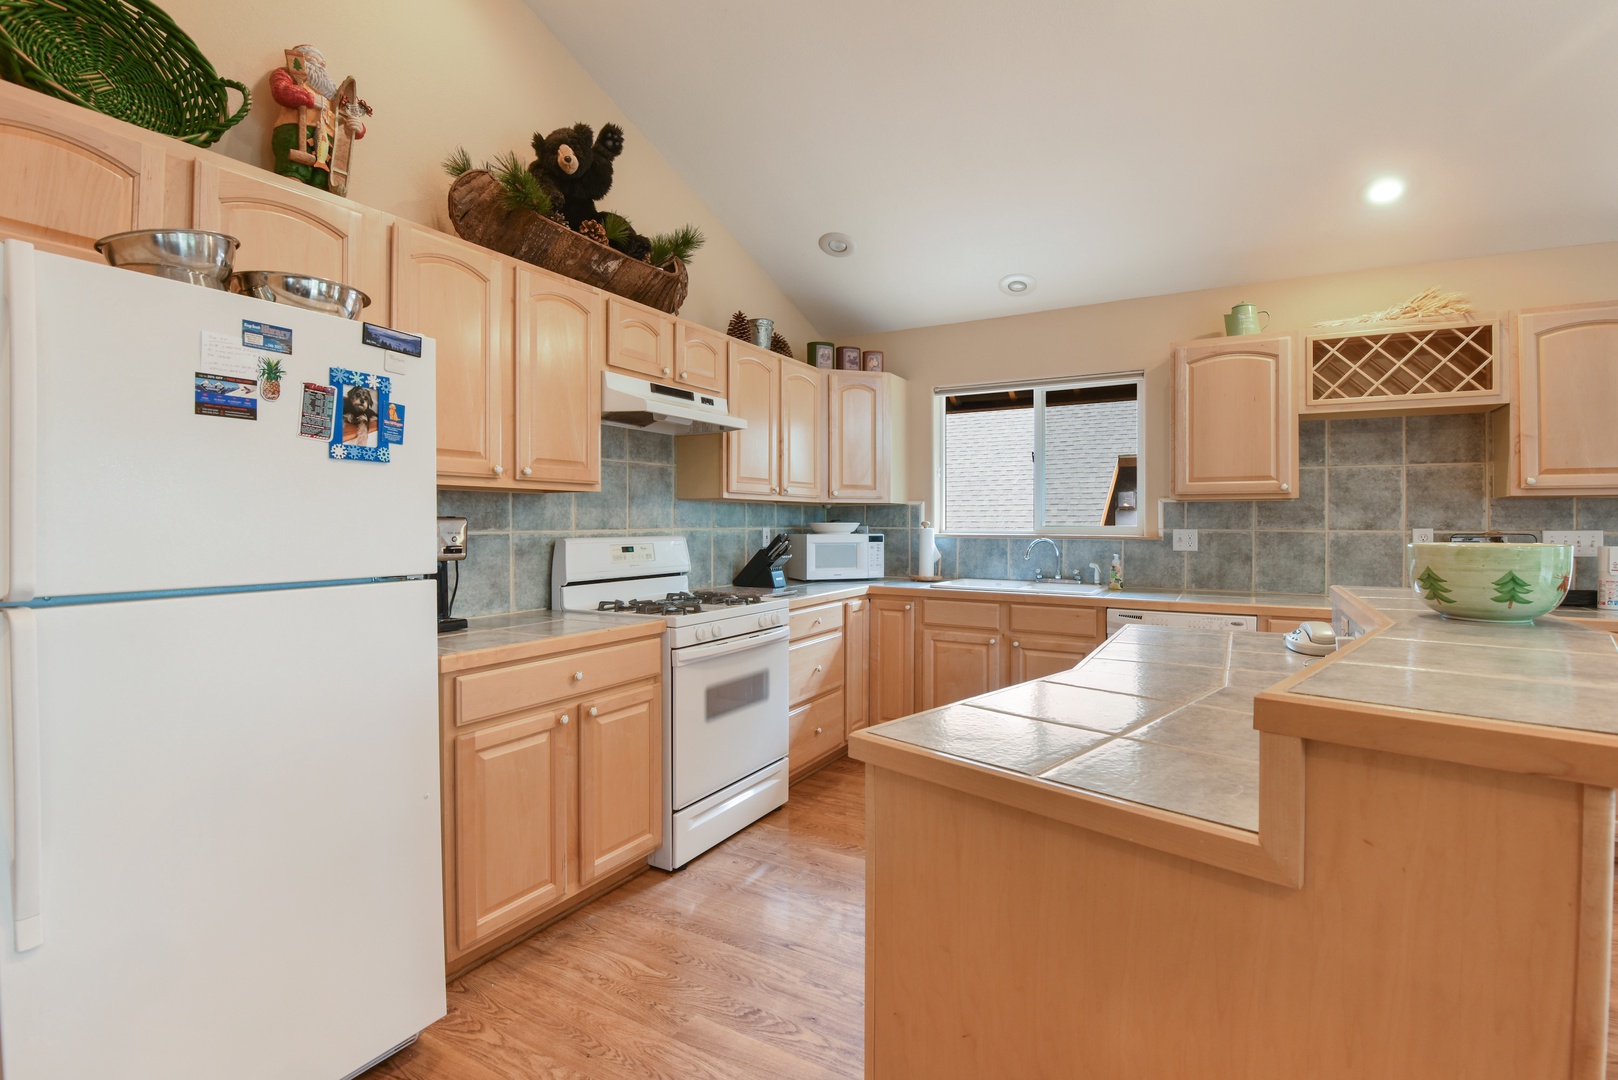 Kitchen with drip coffee maker, blender, dishwasher and more